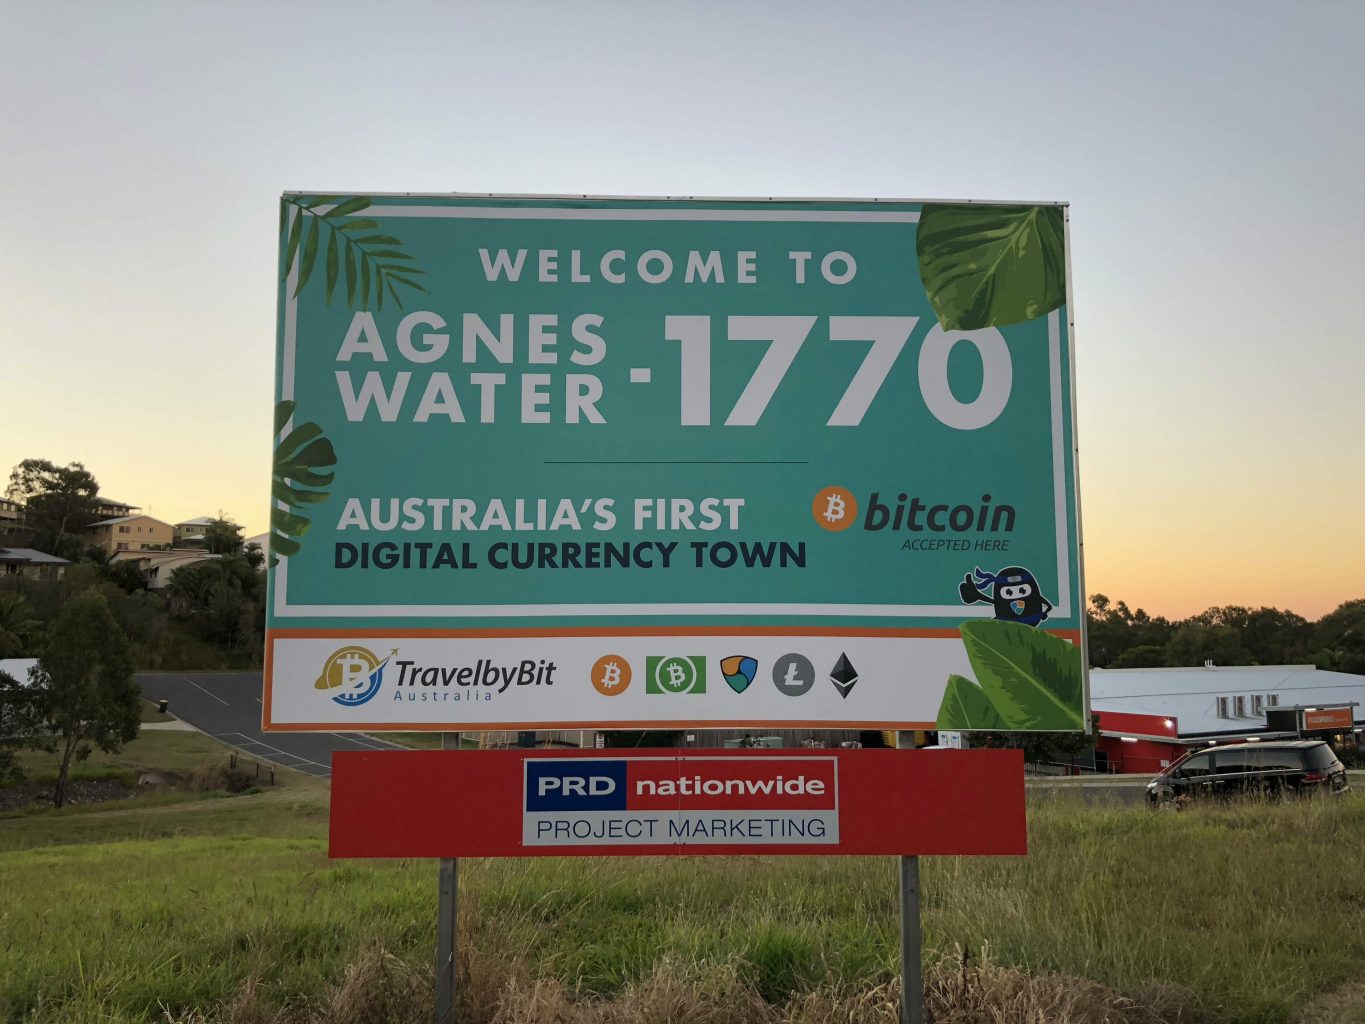 Agnes Water is Australia’s first digital currency town, a town with all sorts of merchants set up using digital currencies.